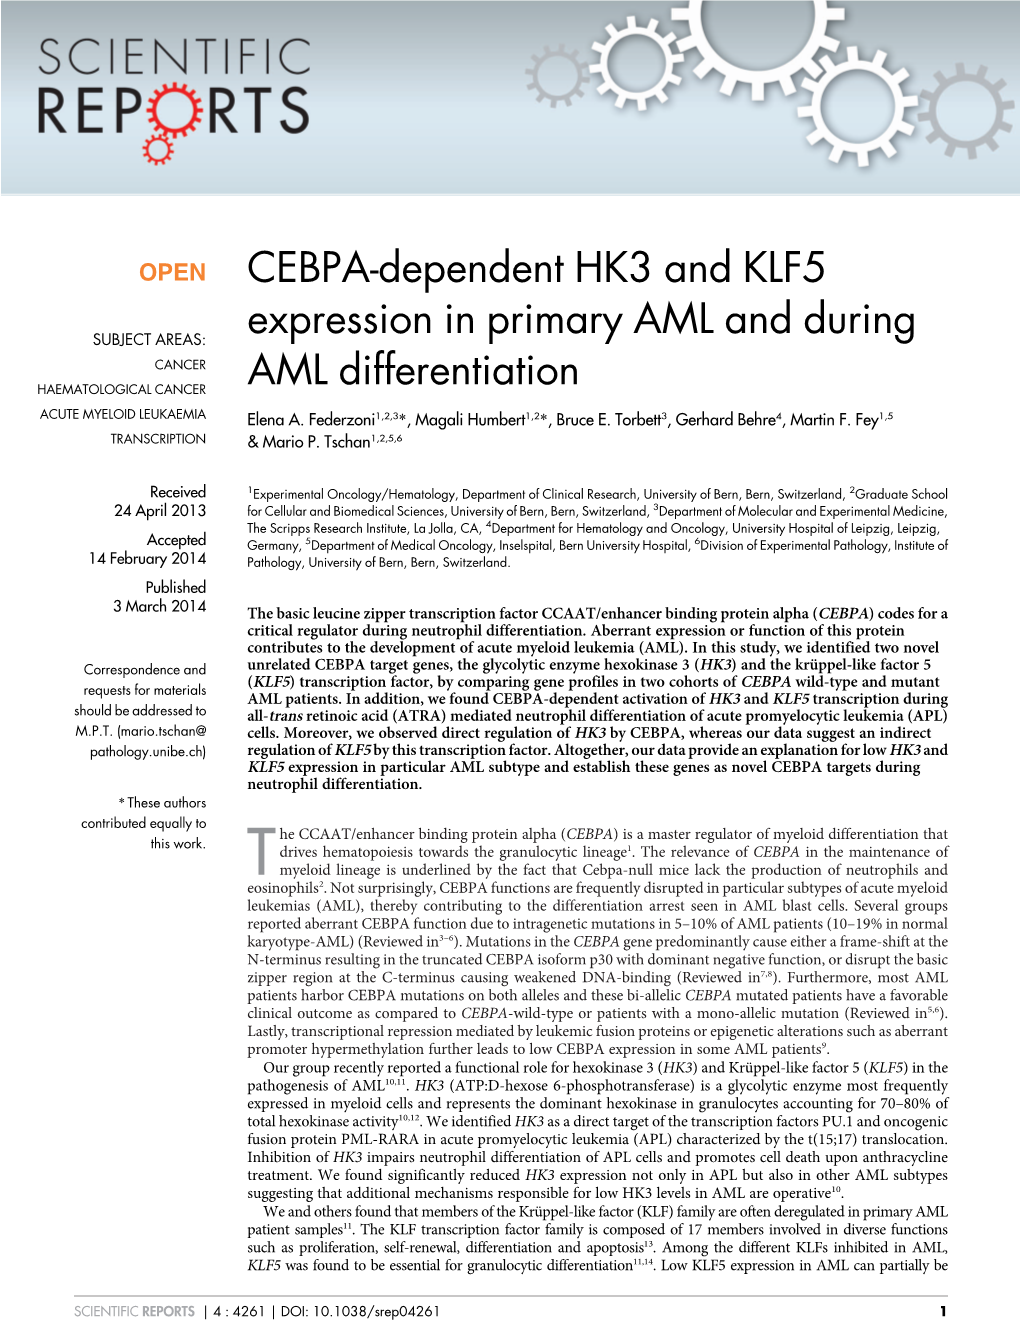 CEBPA-Dependent HK3 and KLF5 Expression in Primary AML and During AML Differentiation